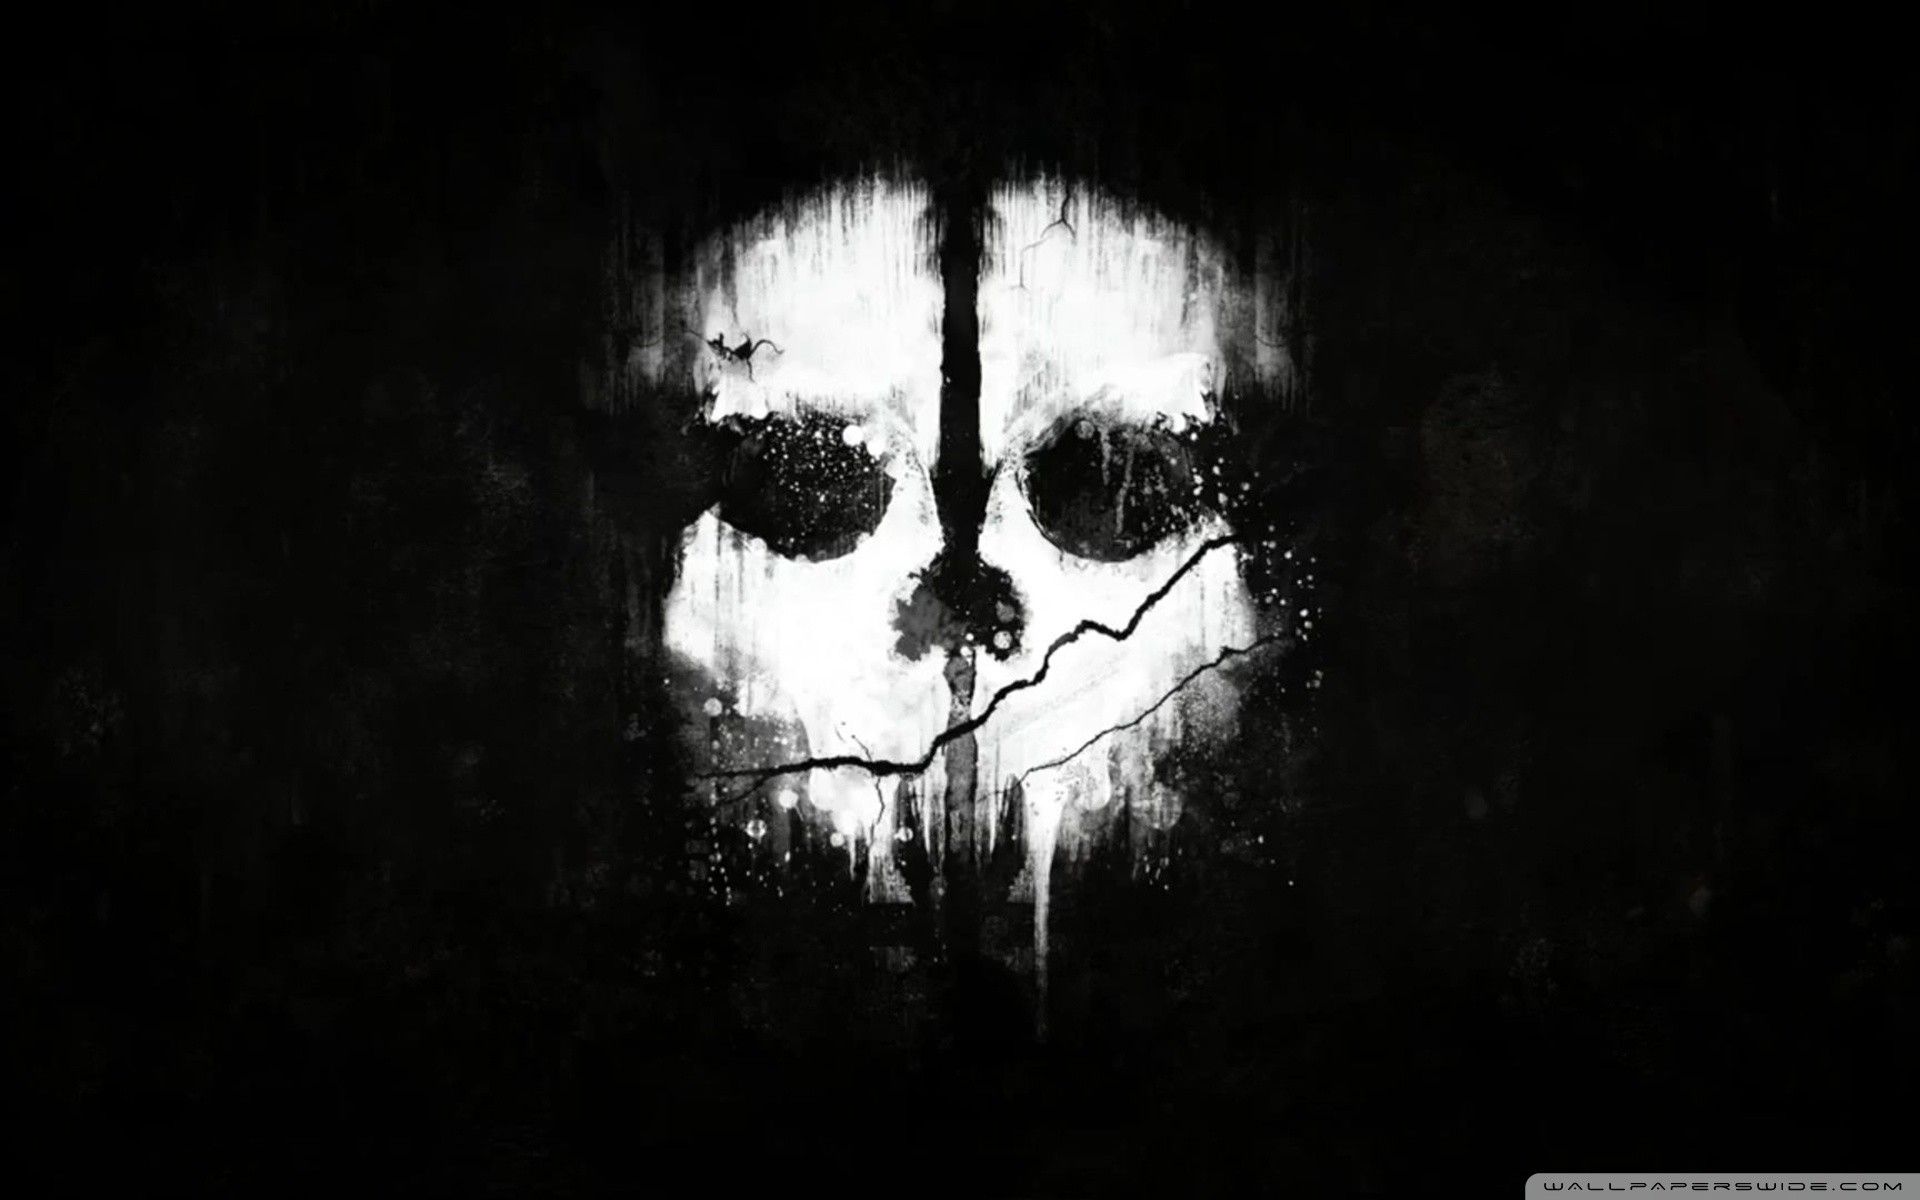 This skull image from Call of Duty Ghosts is actually a reference to the main villain's time spent in the jungle. Roarke was said to have been kept in a hole as